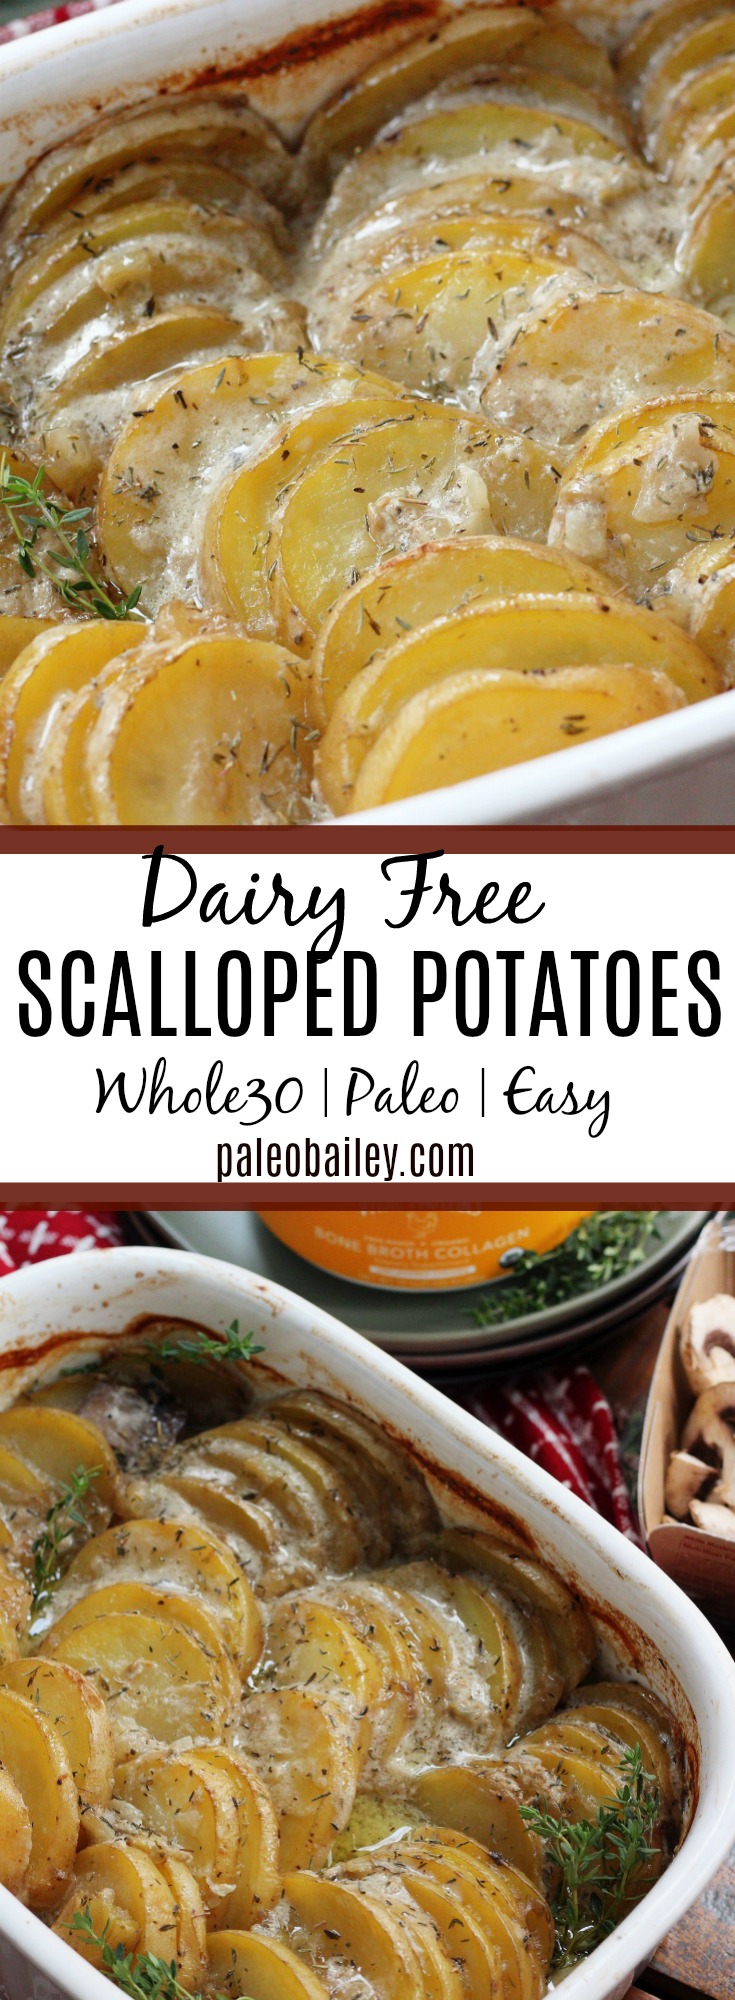 Dairy Free Creamy Scalloped Potatoes are the perfect side dish for any occasion. Everyone in the family will love them! #paleo #whole30 #whole30sidedish #scallopedpotatoes #paleoscallopedpotatoes